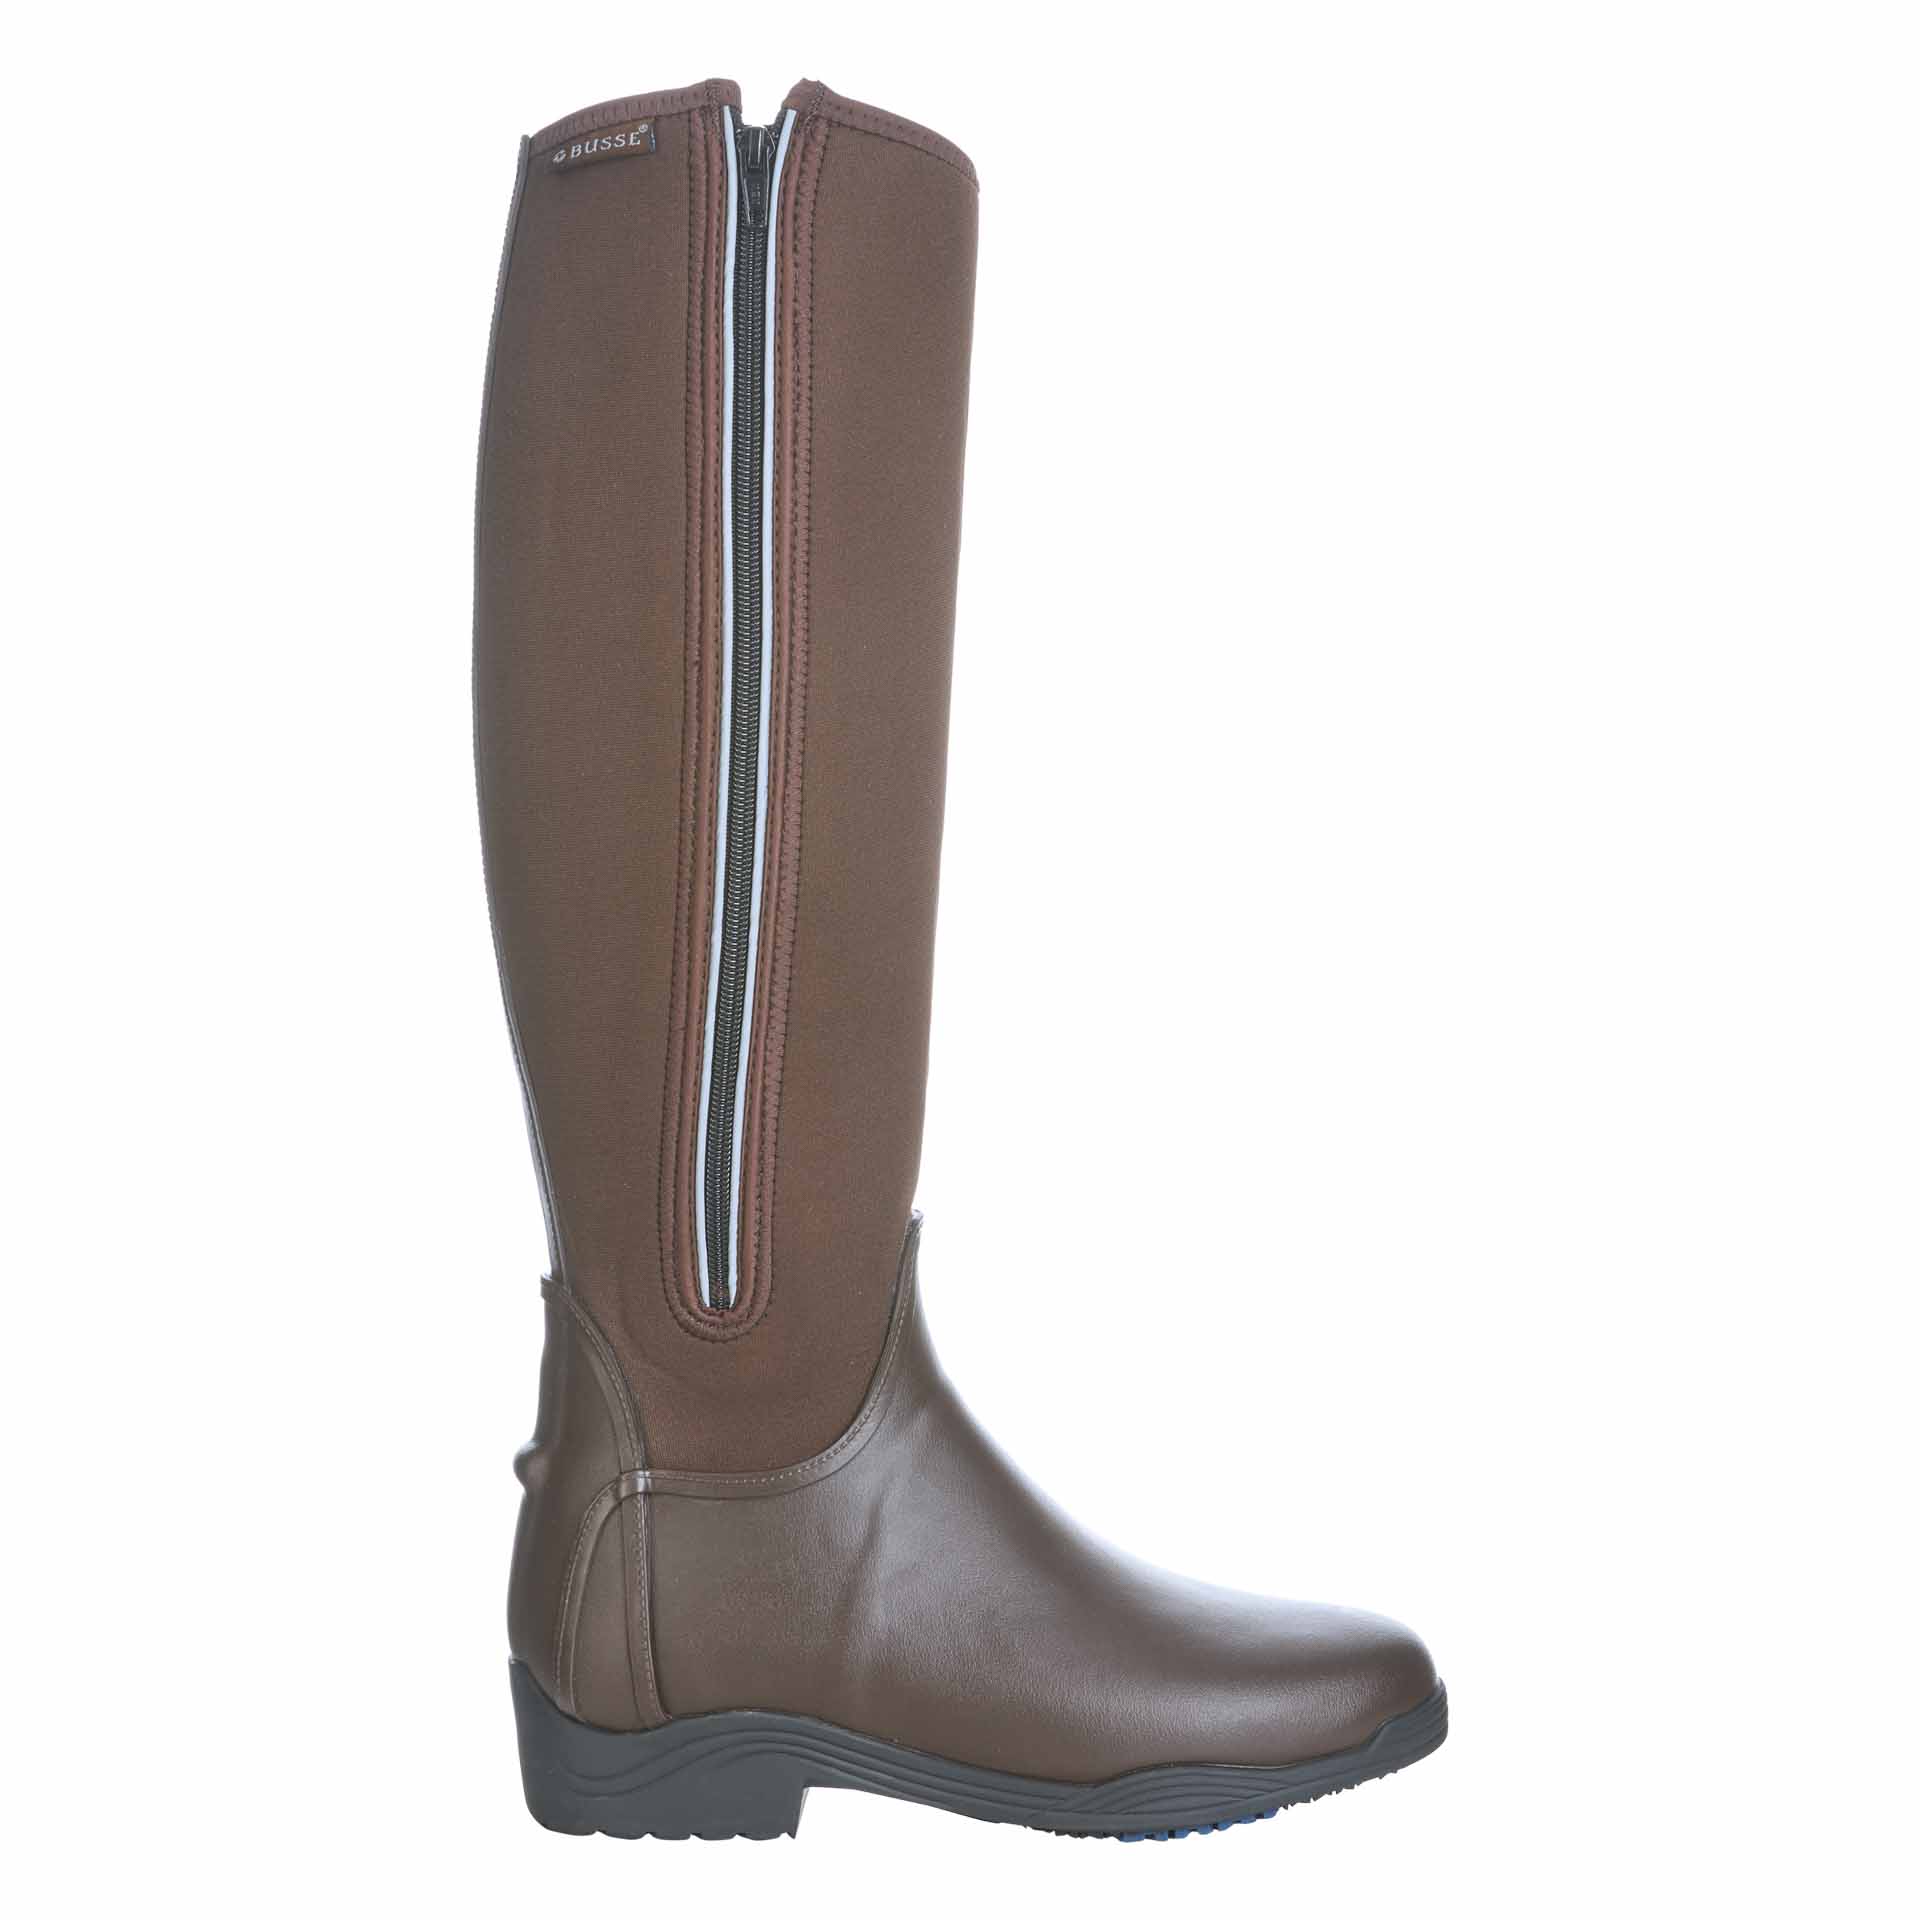 BUSSE Riding Mud Boots CALGARY, brown 36 nn